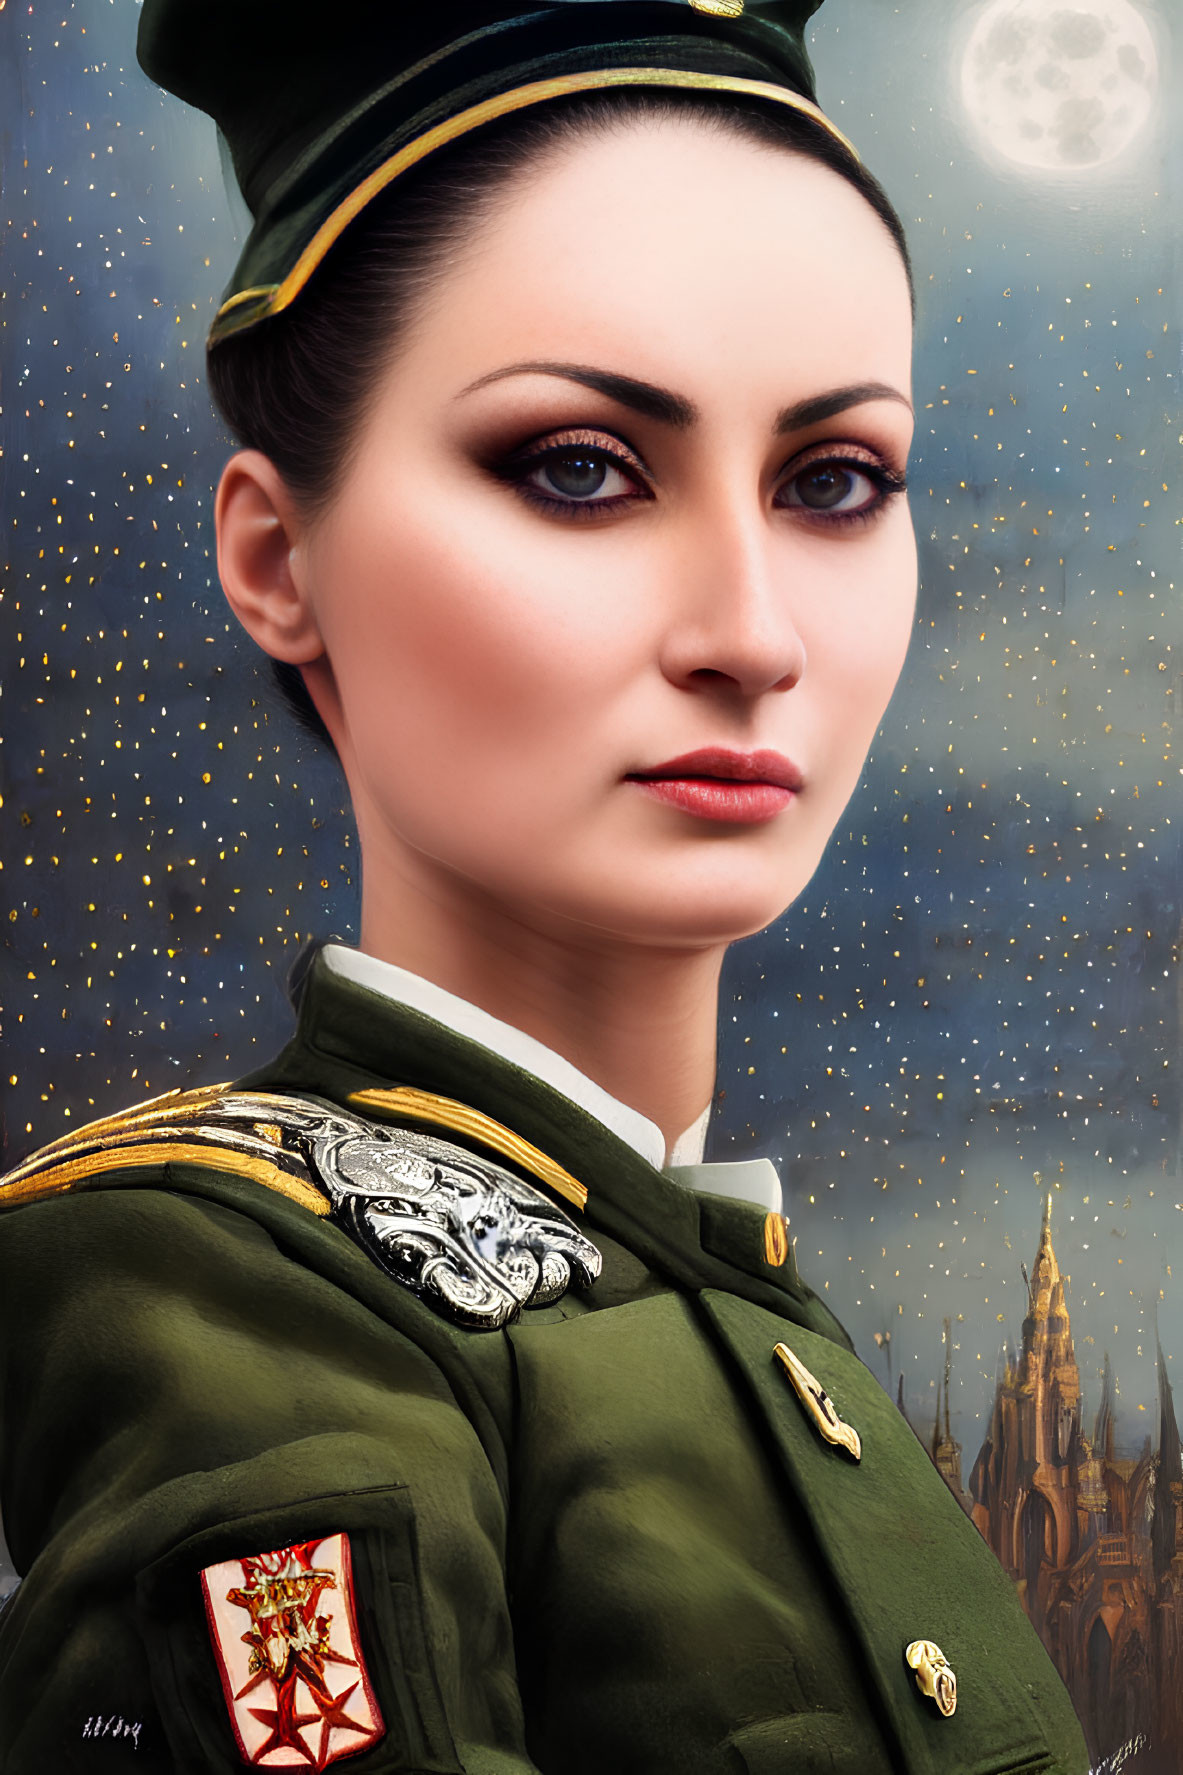 Decorated military woman in uniform with intense gaze, moonlit gothic cathedral background